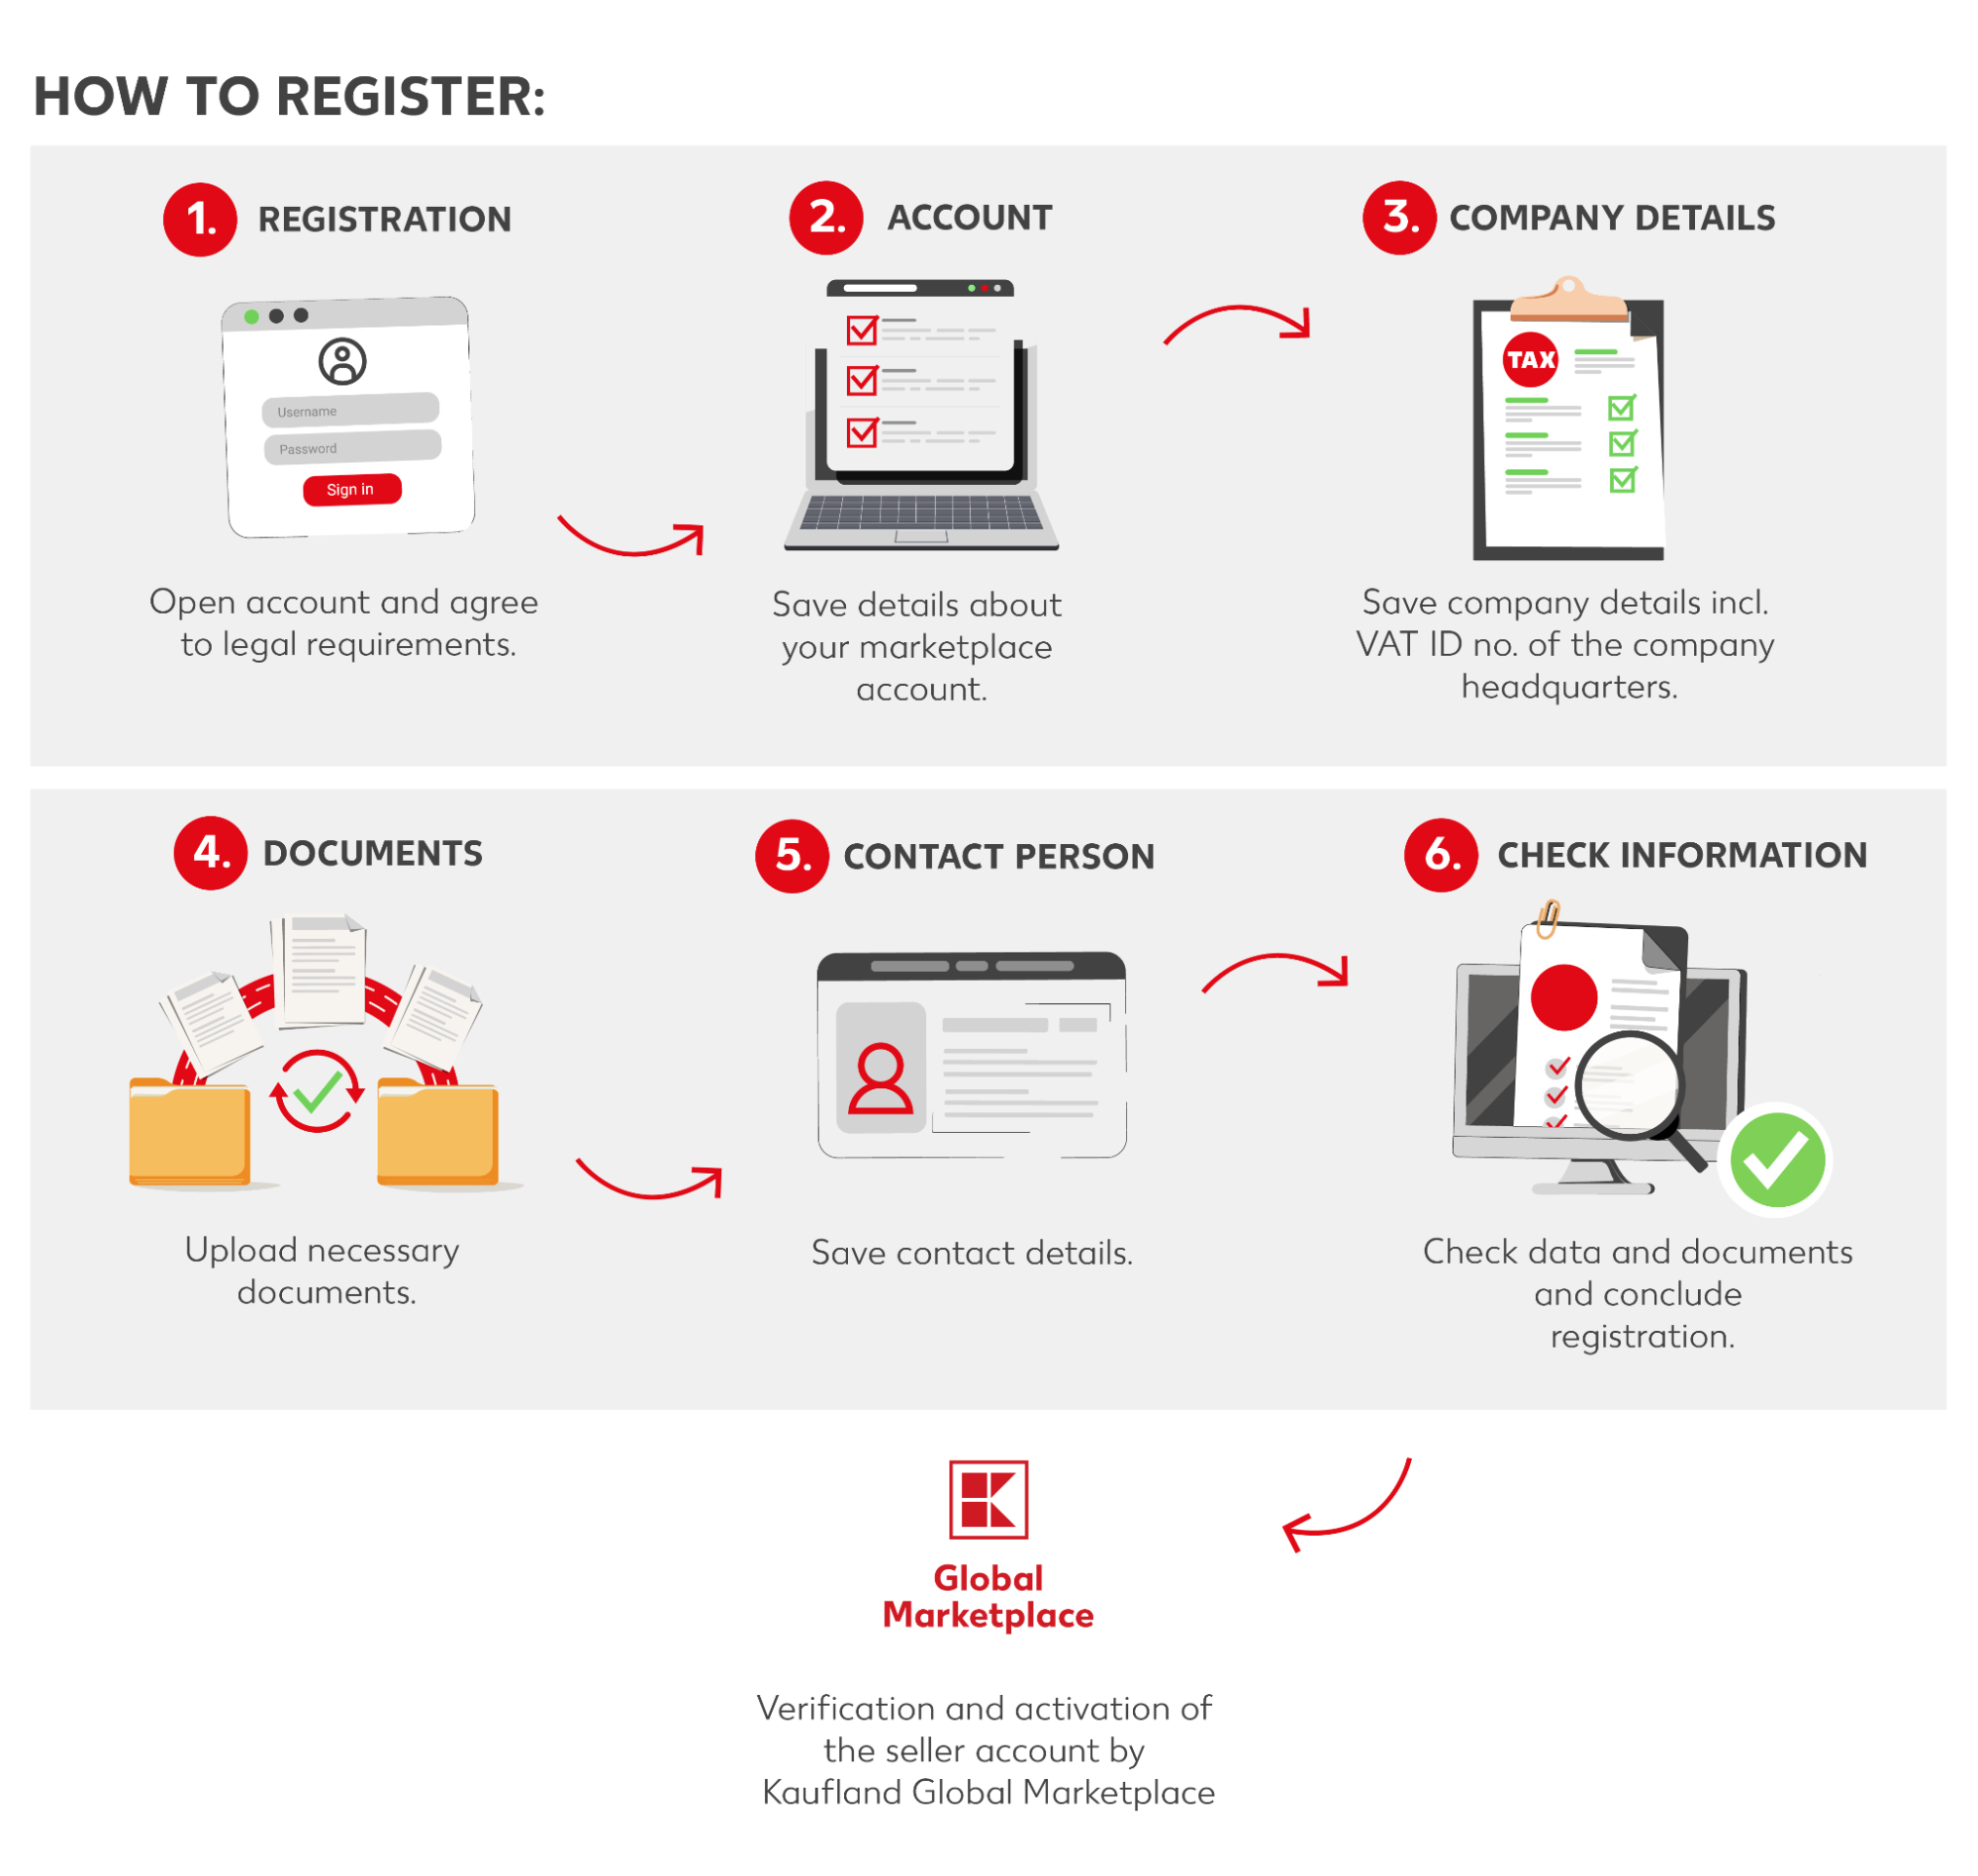 How to register on Kaufland: the instructions from Kaufland Seller University